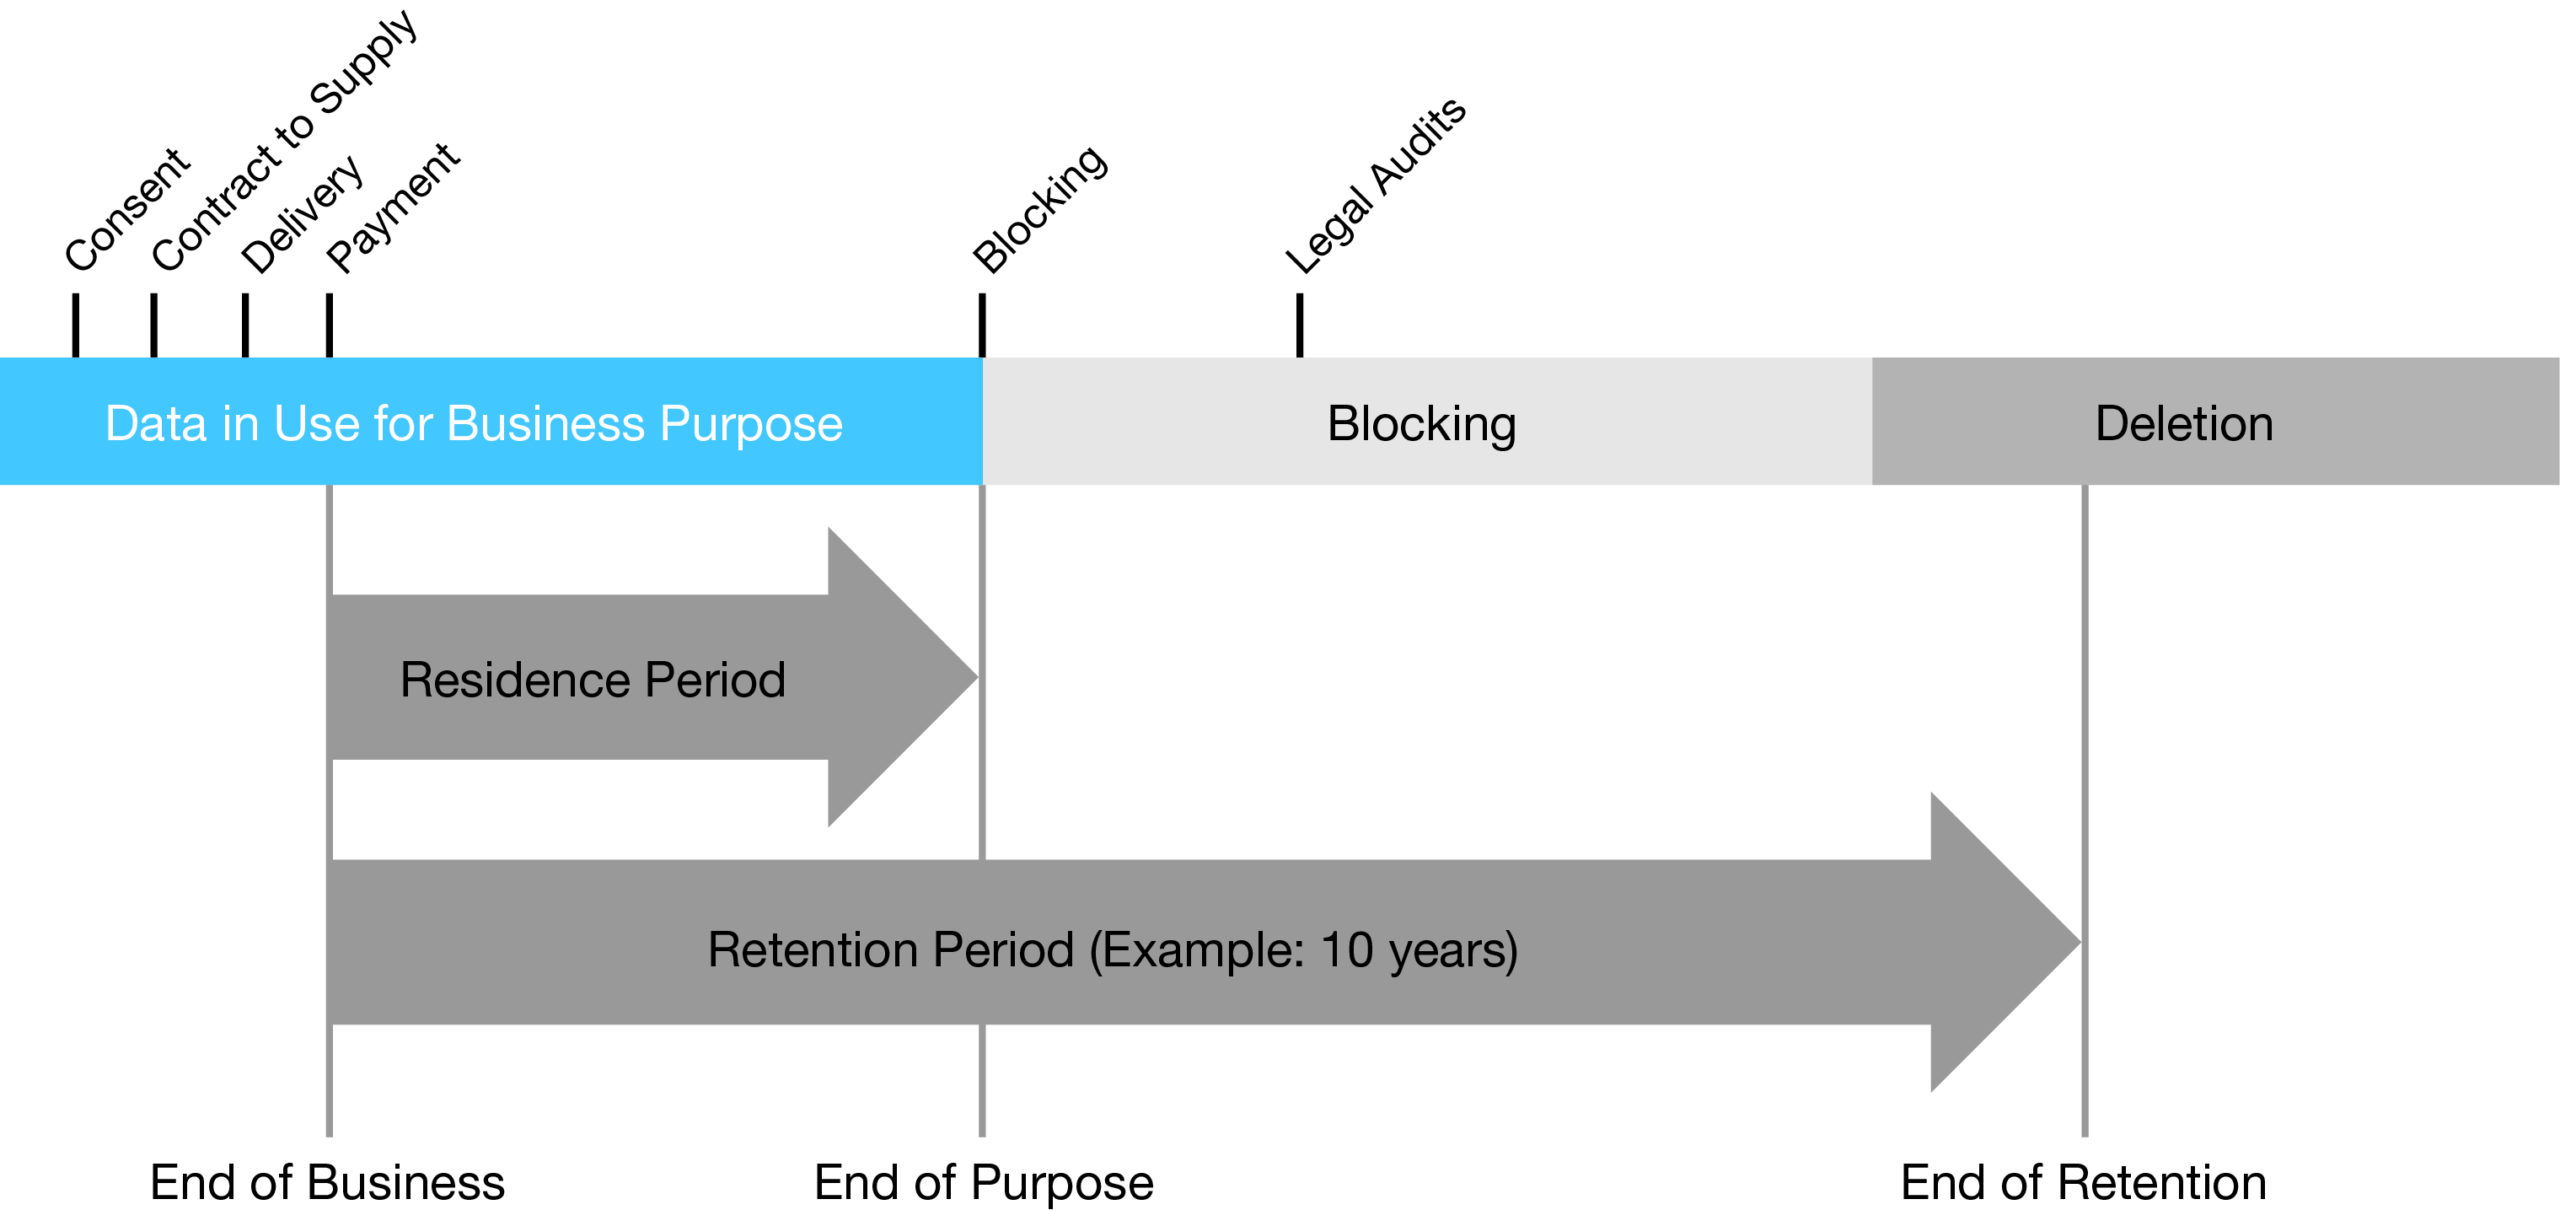 Figure 4 — SAP Data Privacy Integration helps meet data deletion requirements with configurable deletion periods